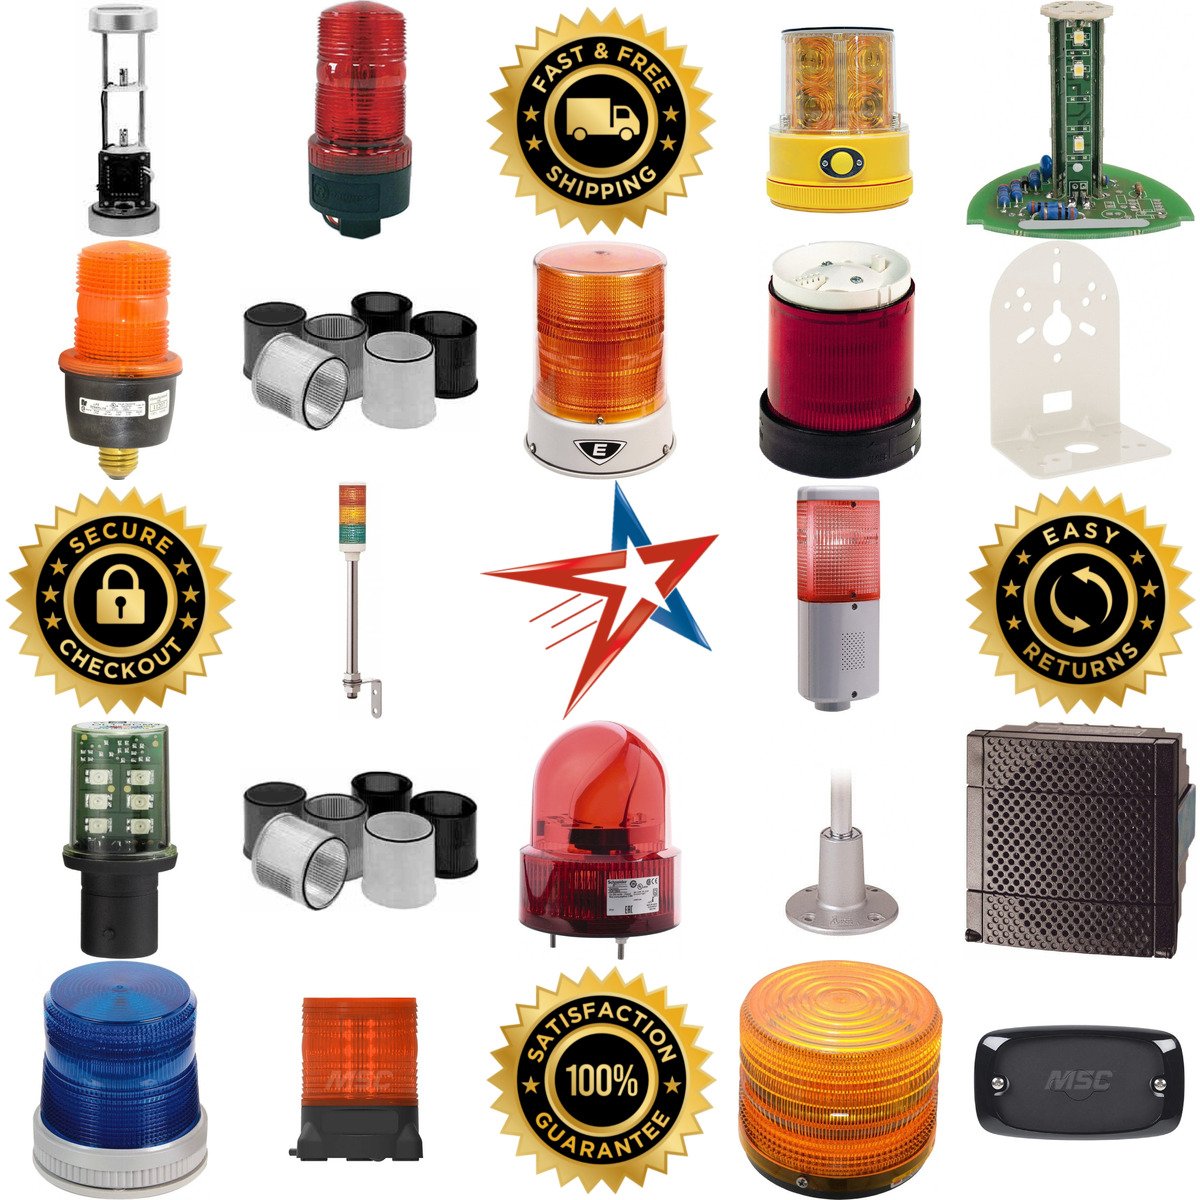 A selection of Sirens and Safety Lights products on GoVets